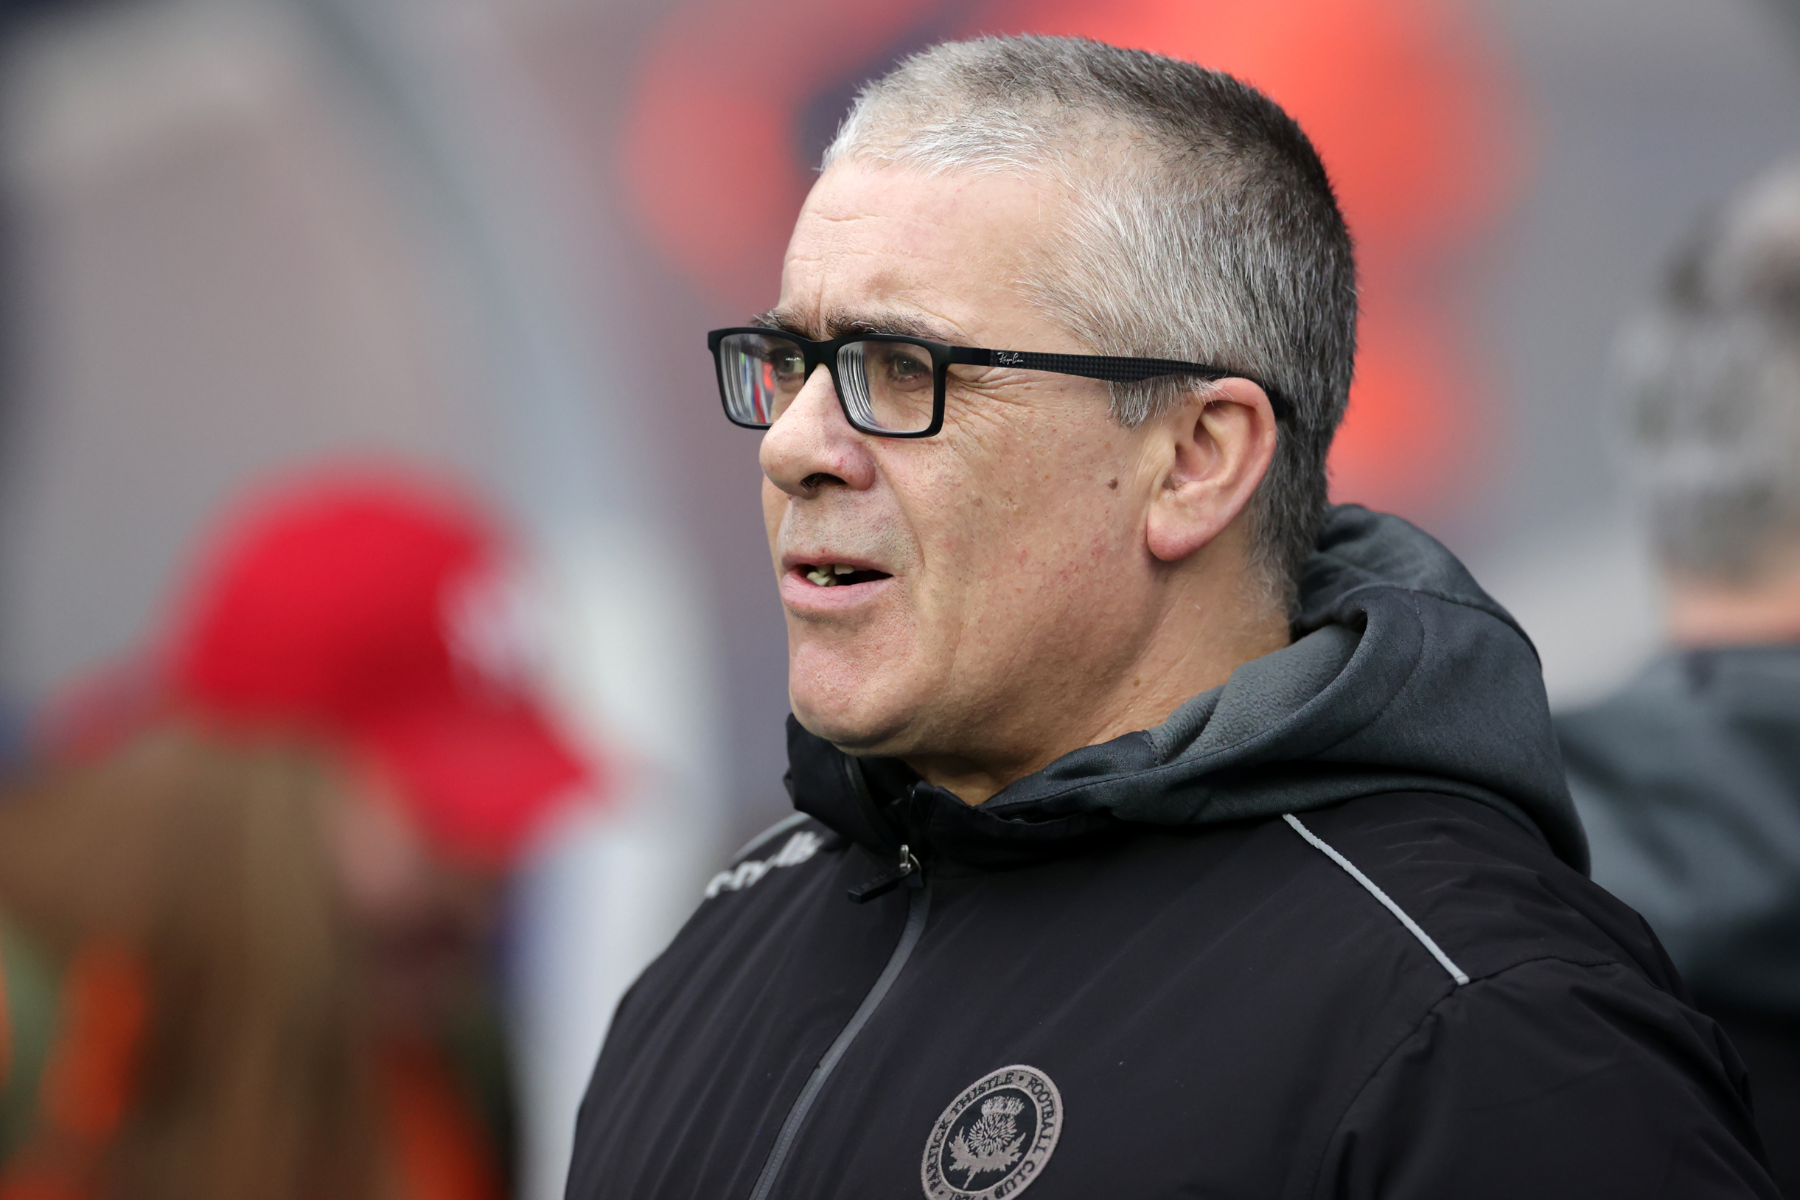 Ian McCall Partick Thistle sacking explained by club's board